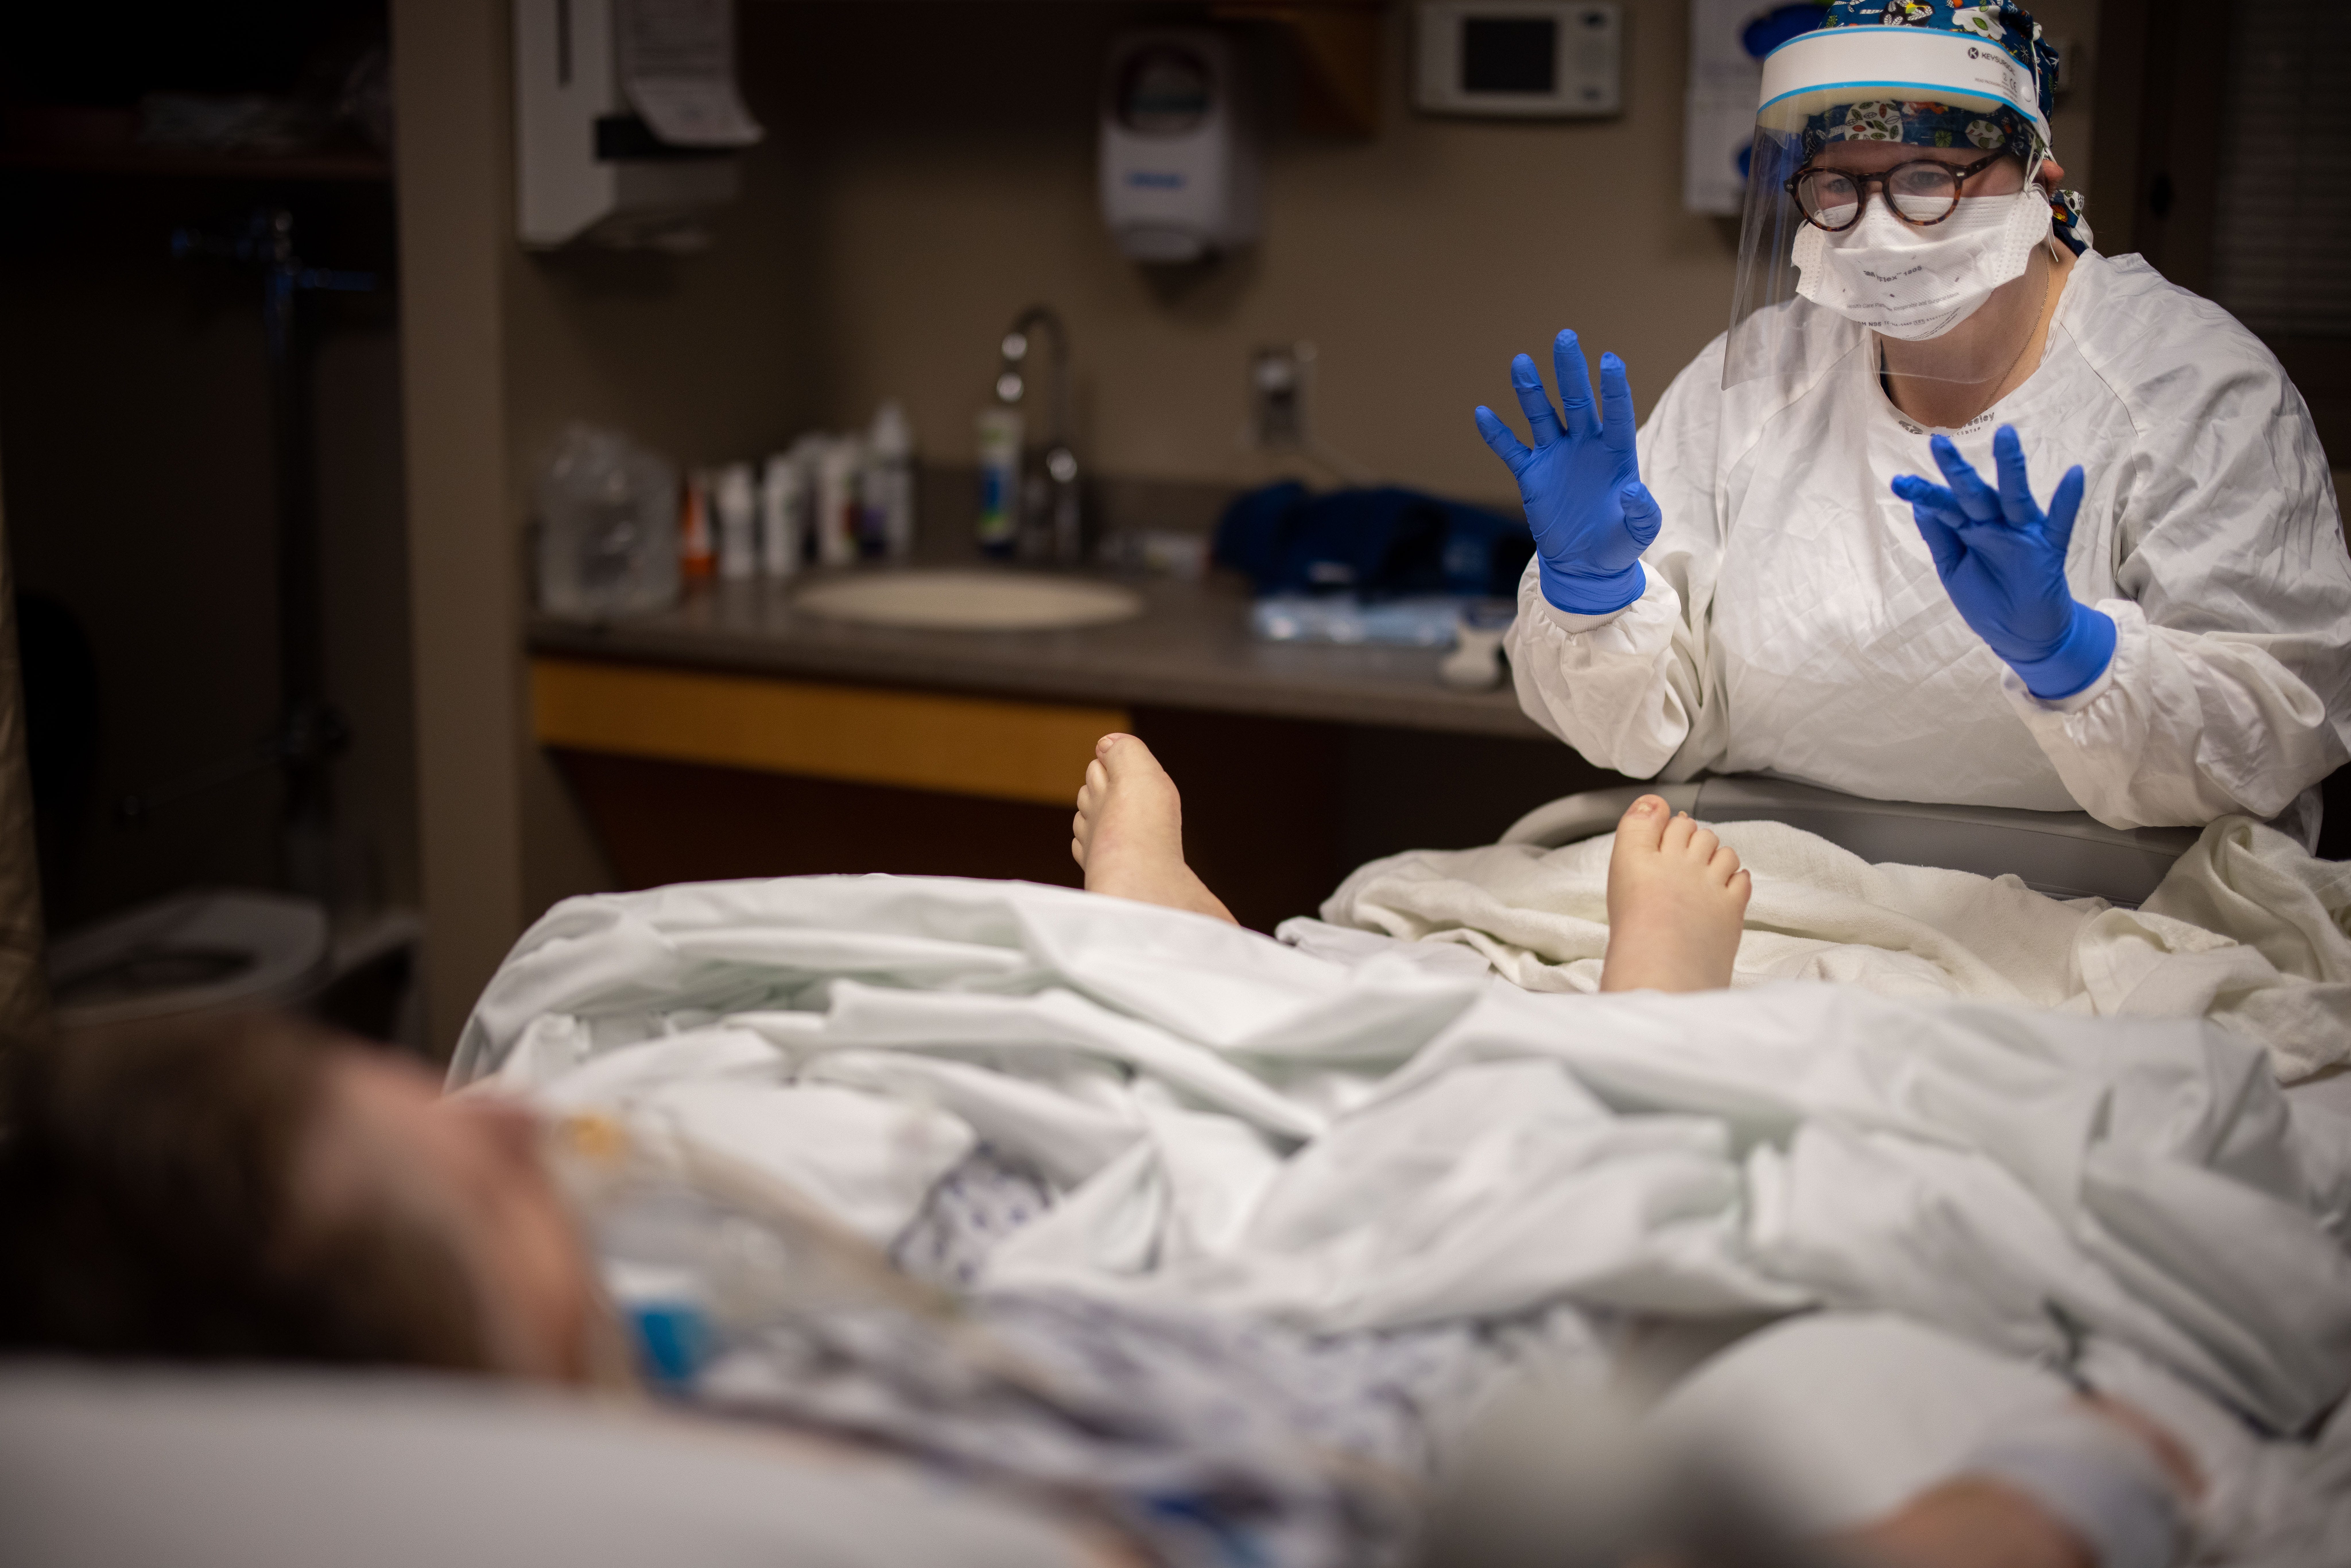 ICU nurse Abbey Malone asks a COVID-19 patient to wiggle her toes to assess her recovery before removing her breathing tube at Mary Greeley Medical Center in Ames, Iowa, Monday, Dec. 7, 2020.